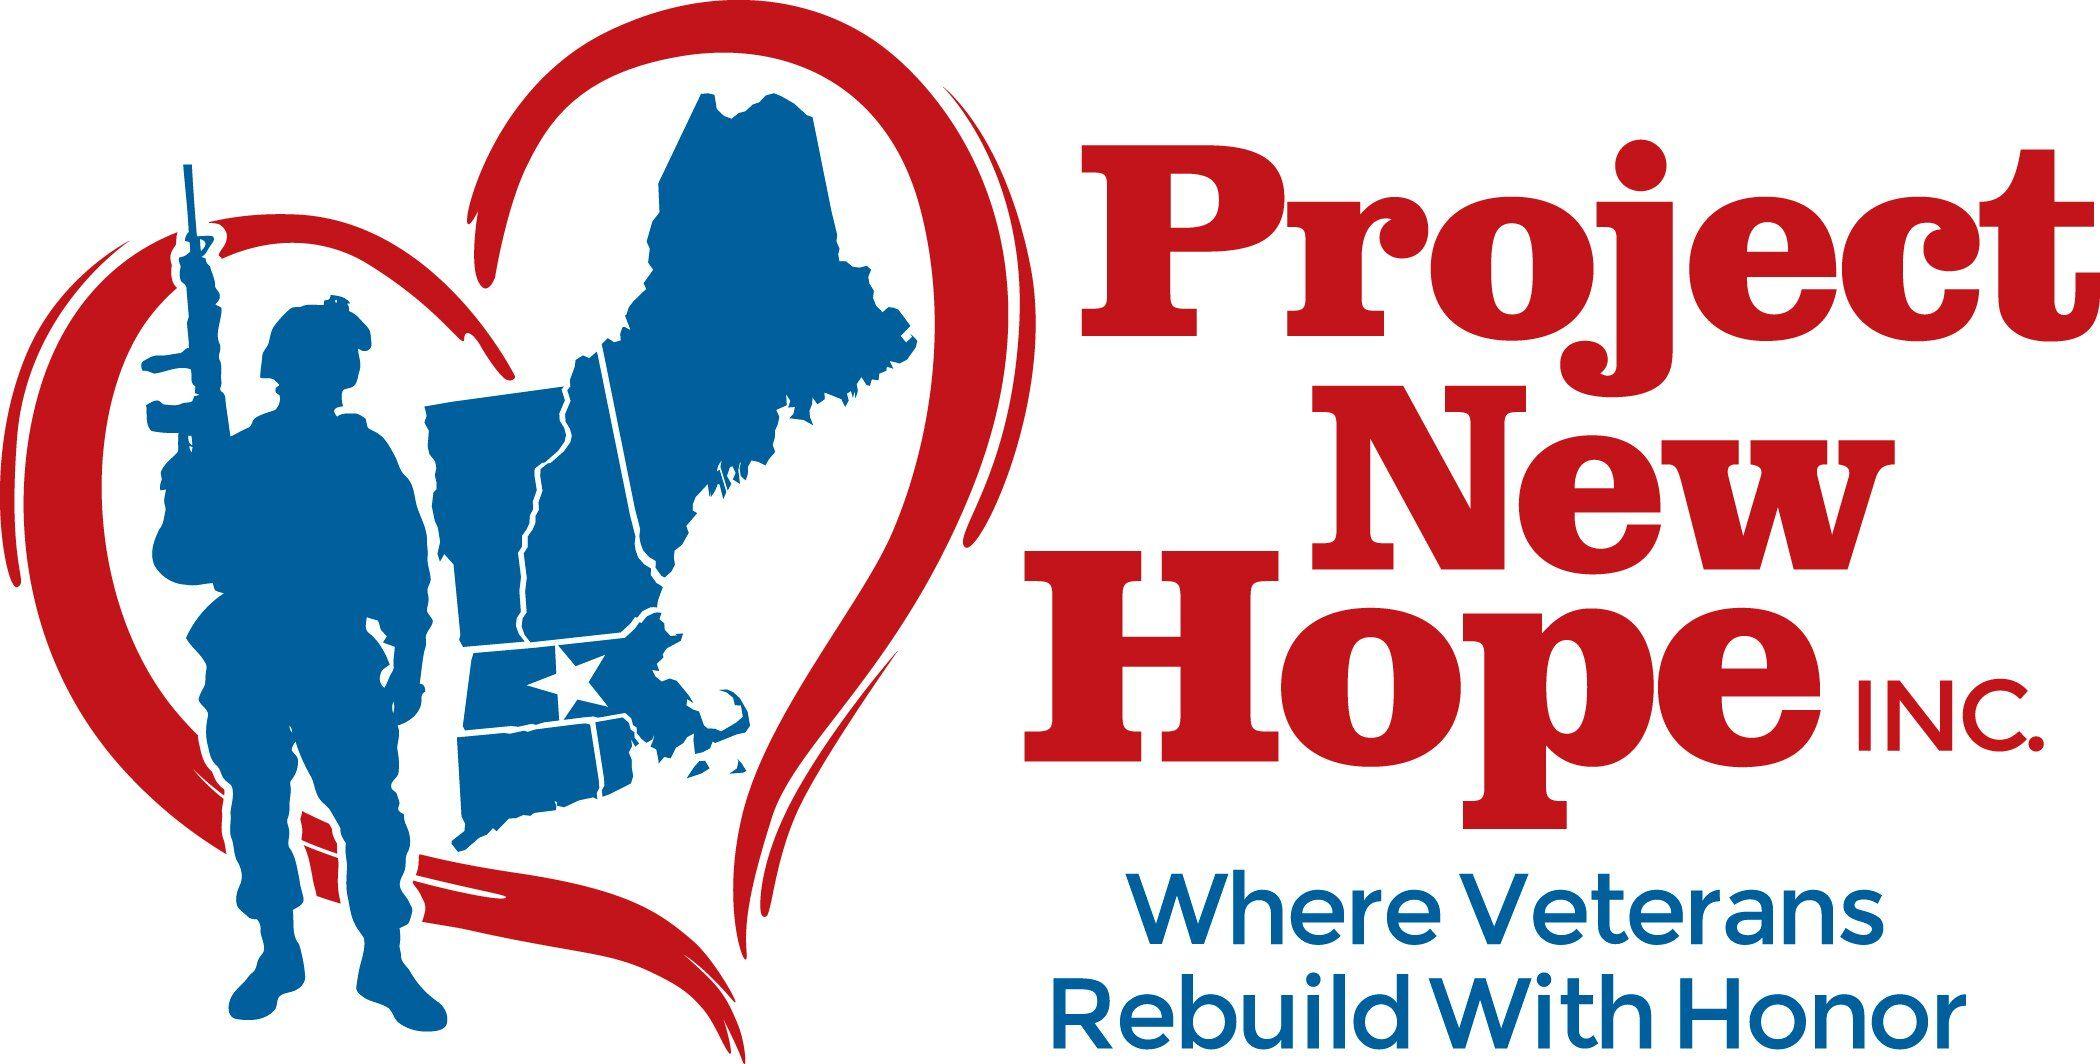 New Hope Logo - Project New Hope logo - The Westfield News